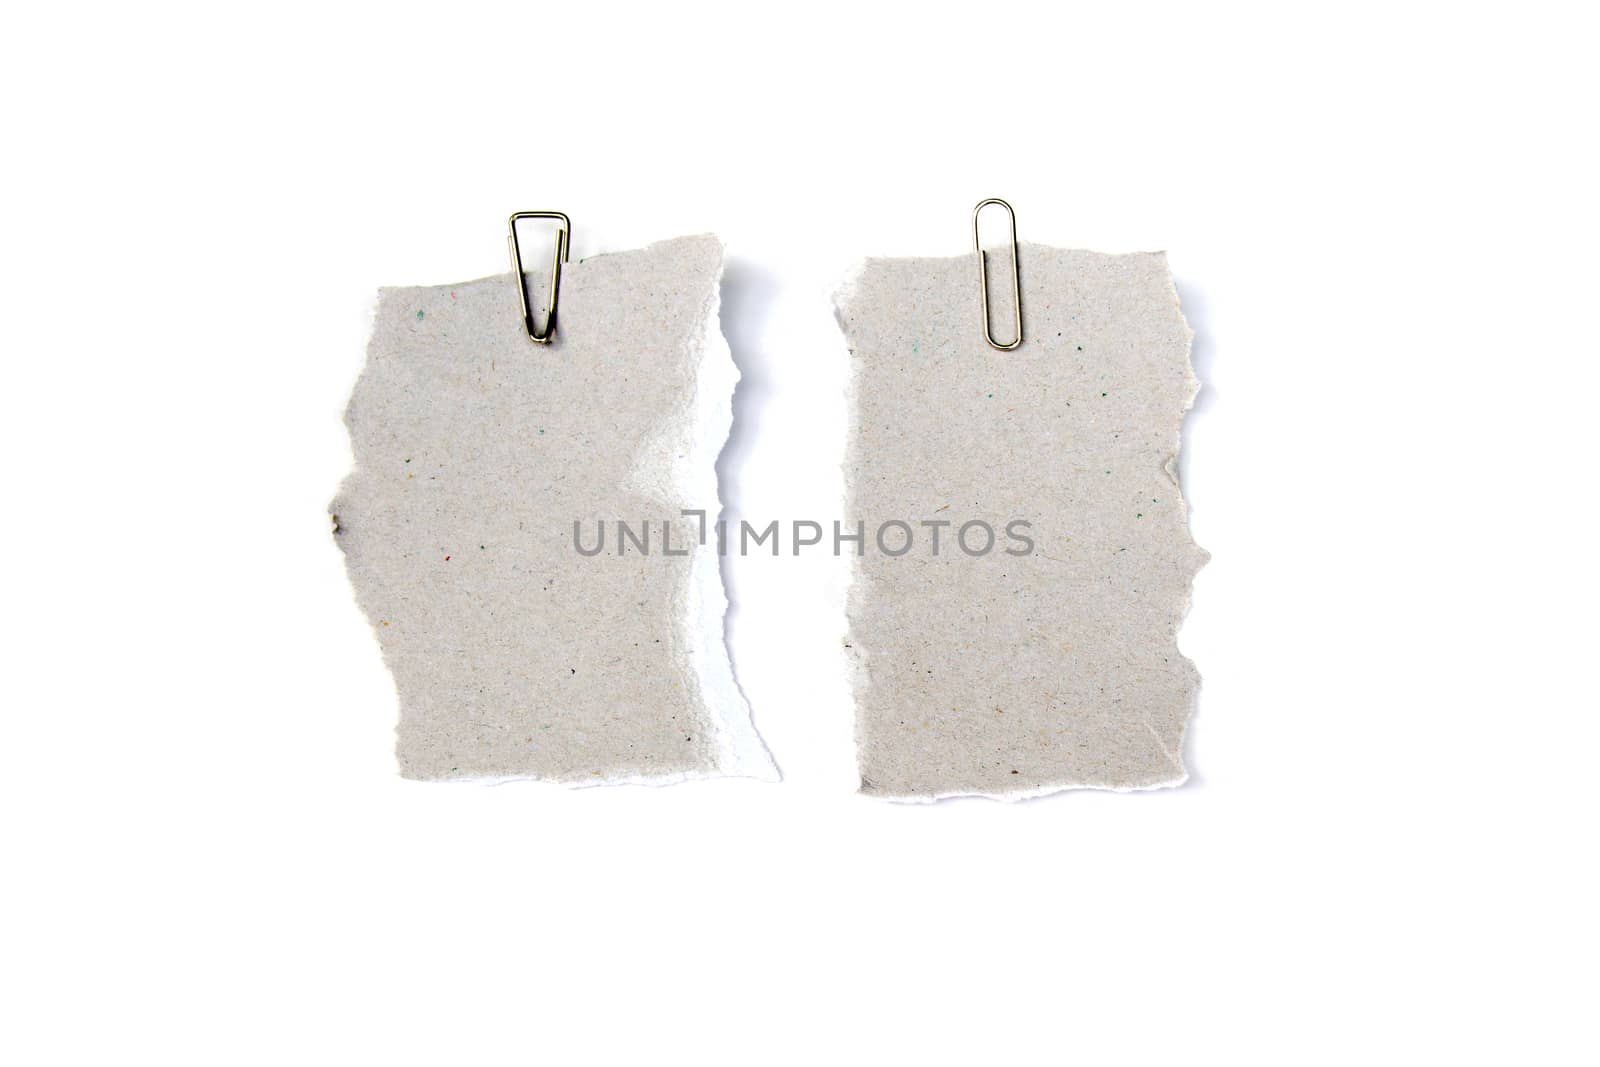 collection of white ripped pieces of paper with paper clip isolated on white background. each one is shot separately